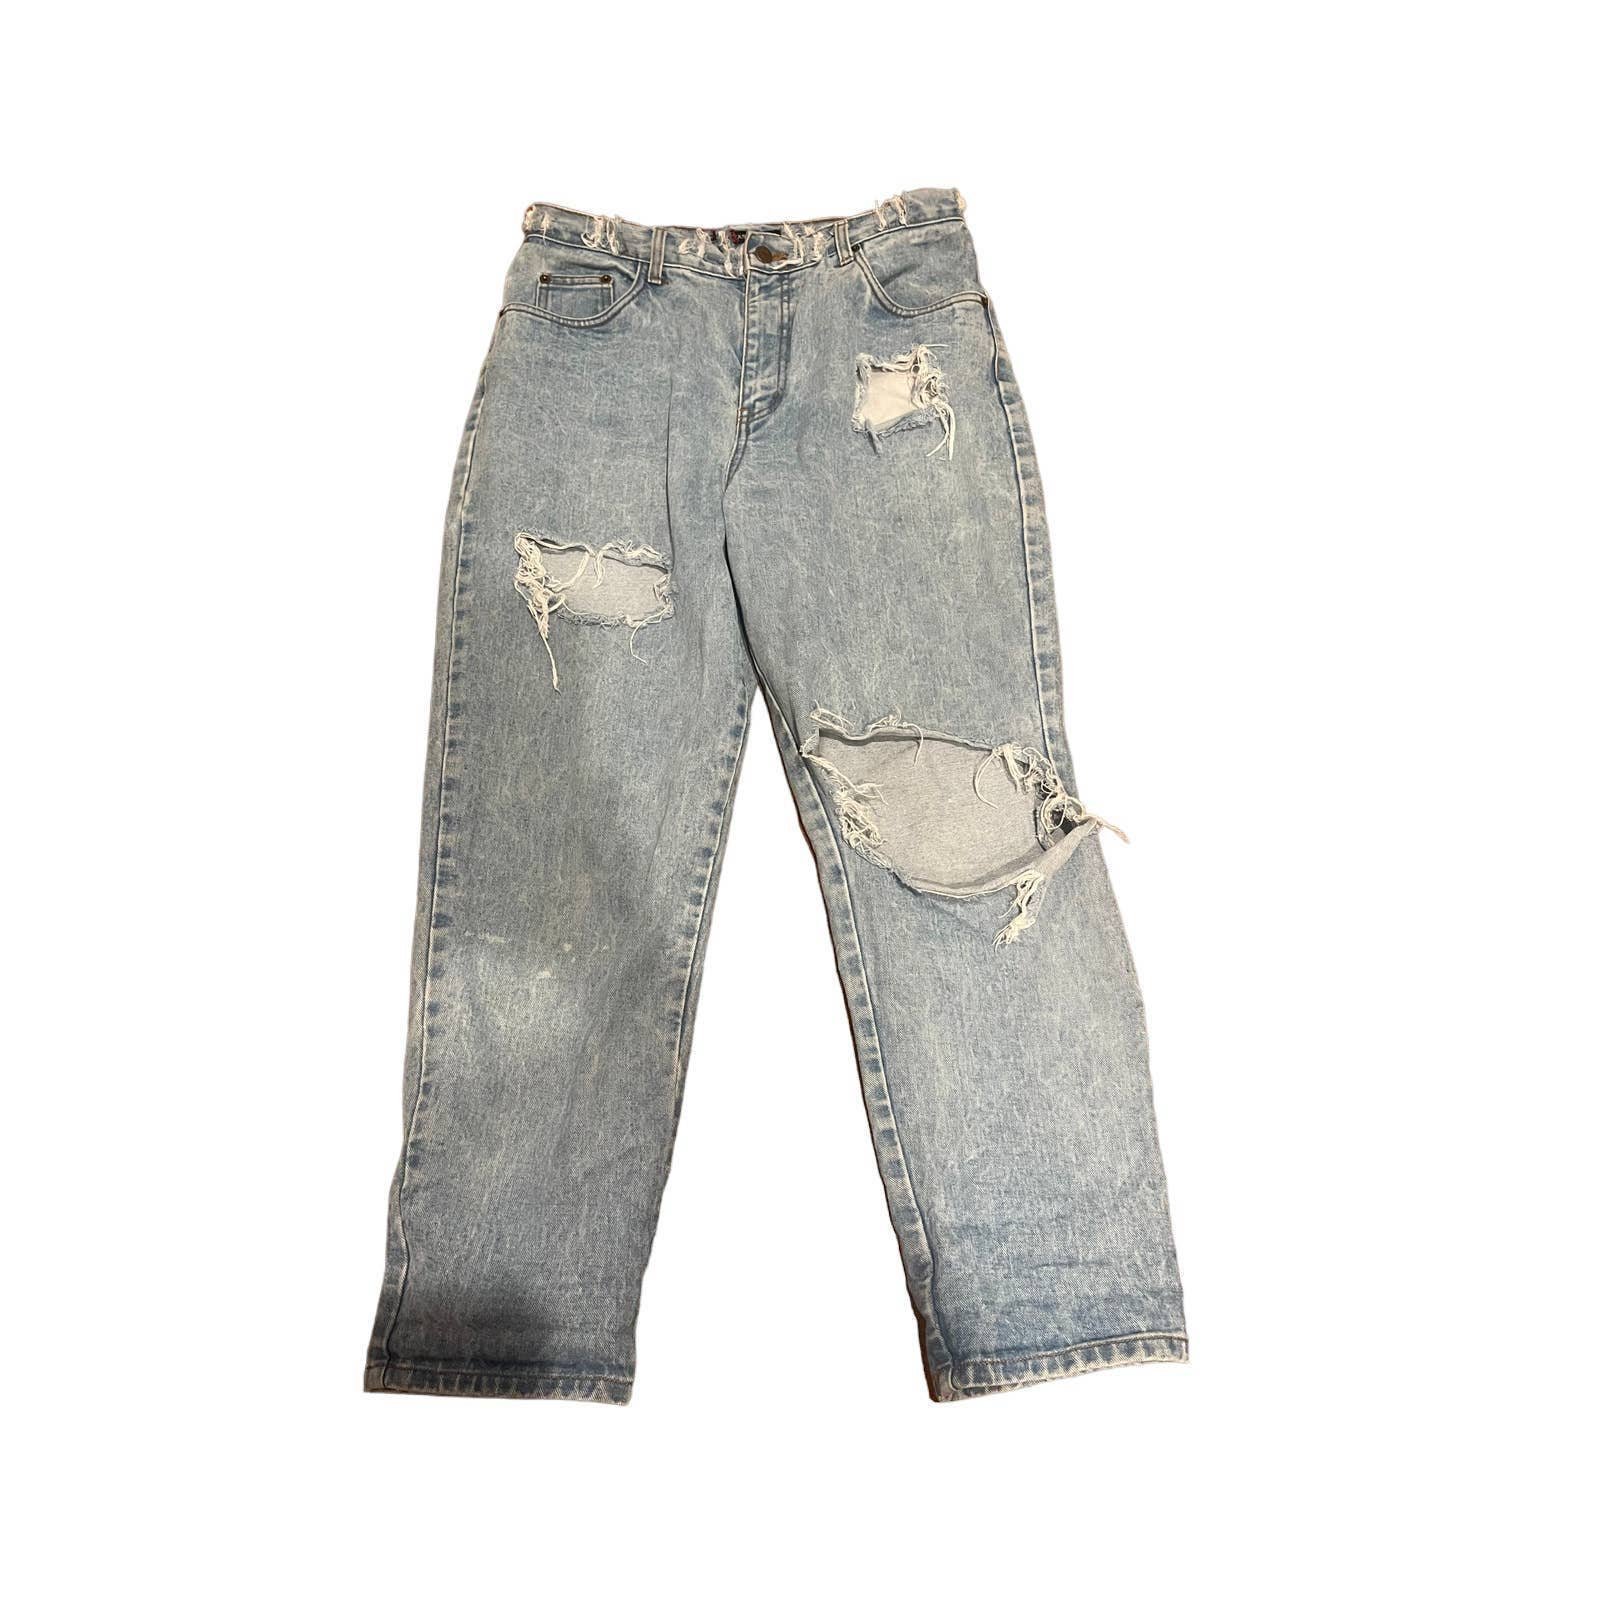 large selection Vintage Bill Blass Distressed Denim Mom Straight Easy Fit Jeans pbWfX0SN5 New Style